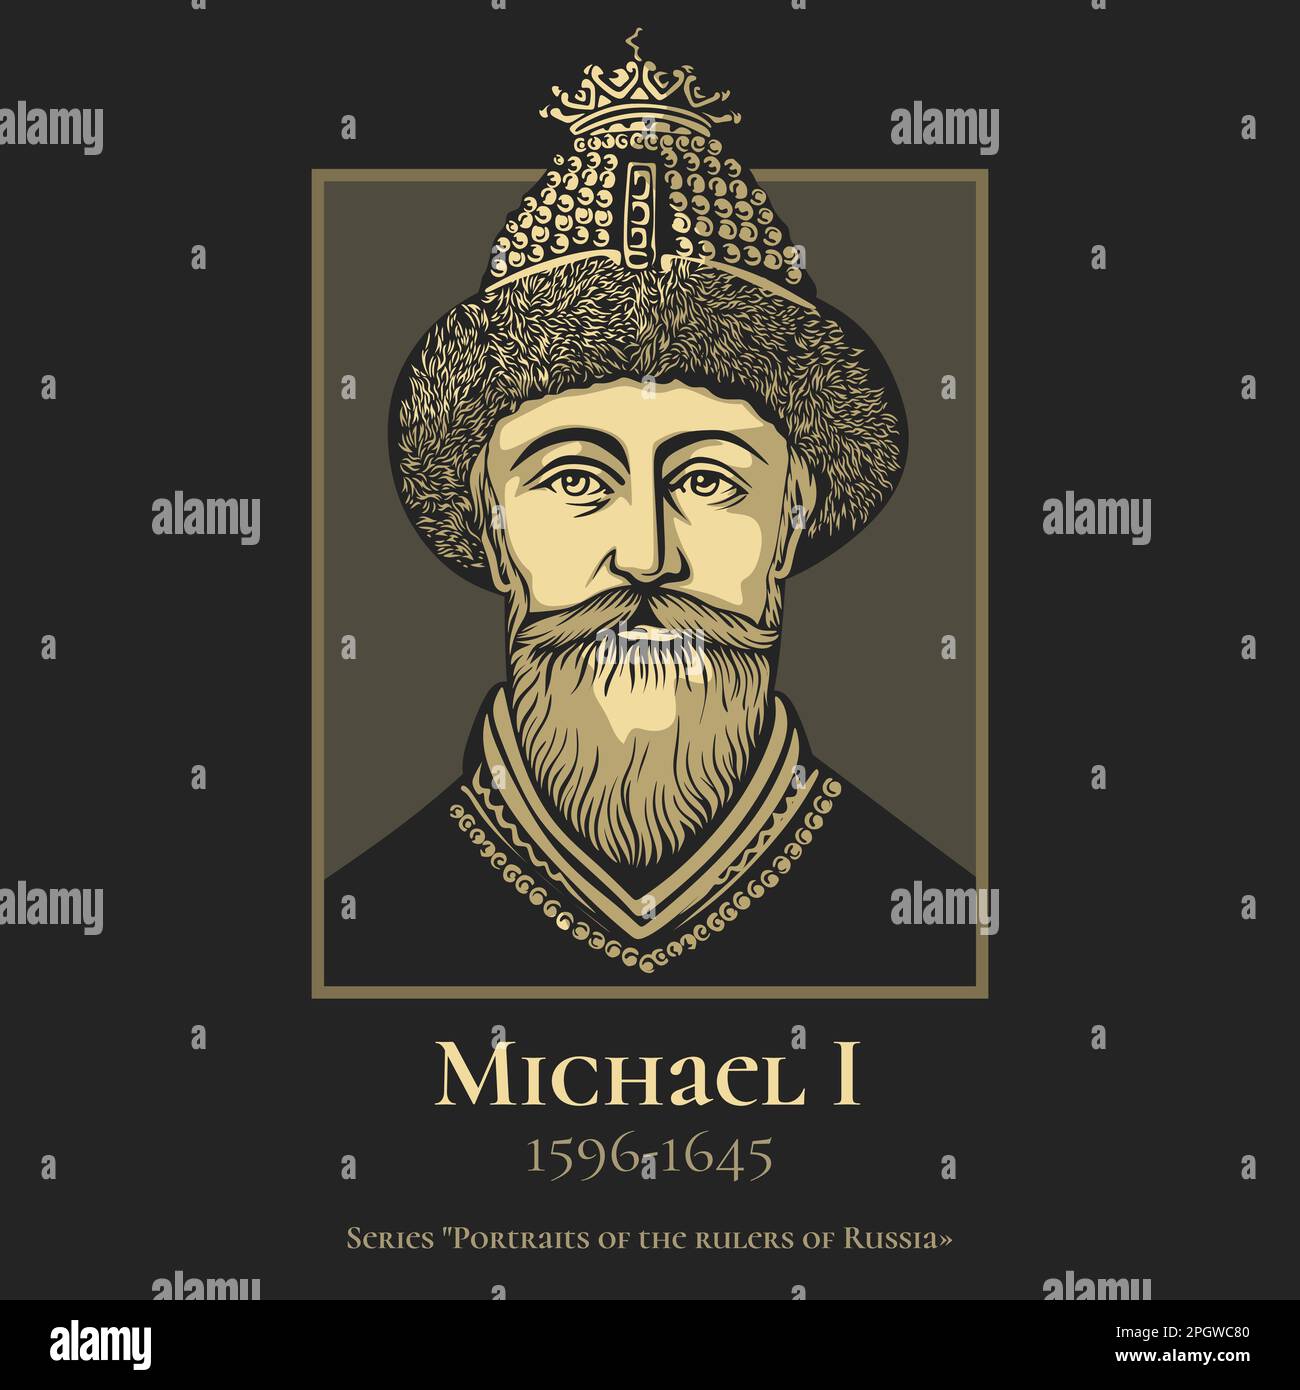 Michael I (1596-1645) became the first Russian tsar of the House of Romanov after the Zemskiy Sobor of 1613 elected him to rule the Tsardom of Russia. Stock Vector